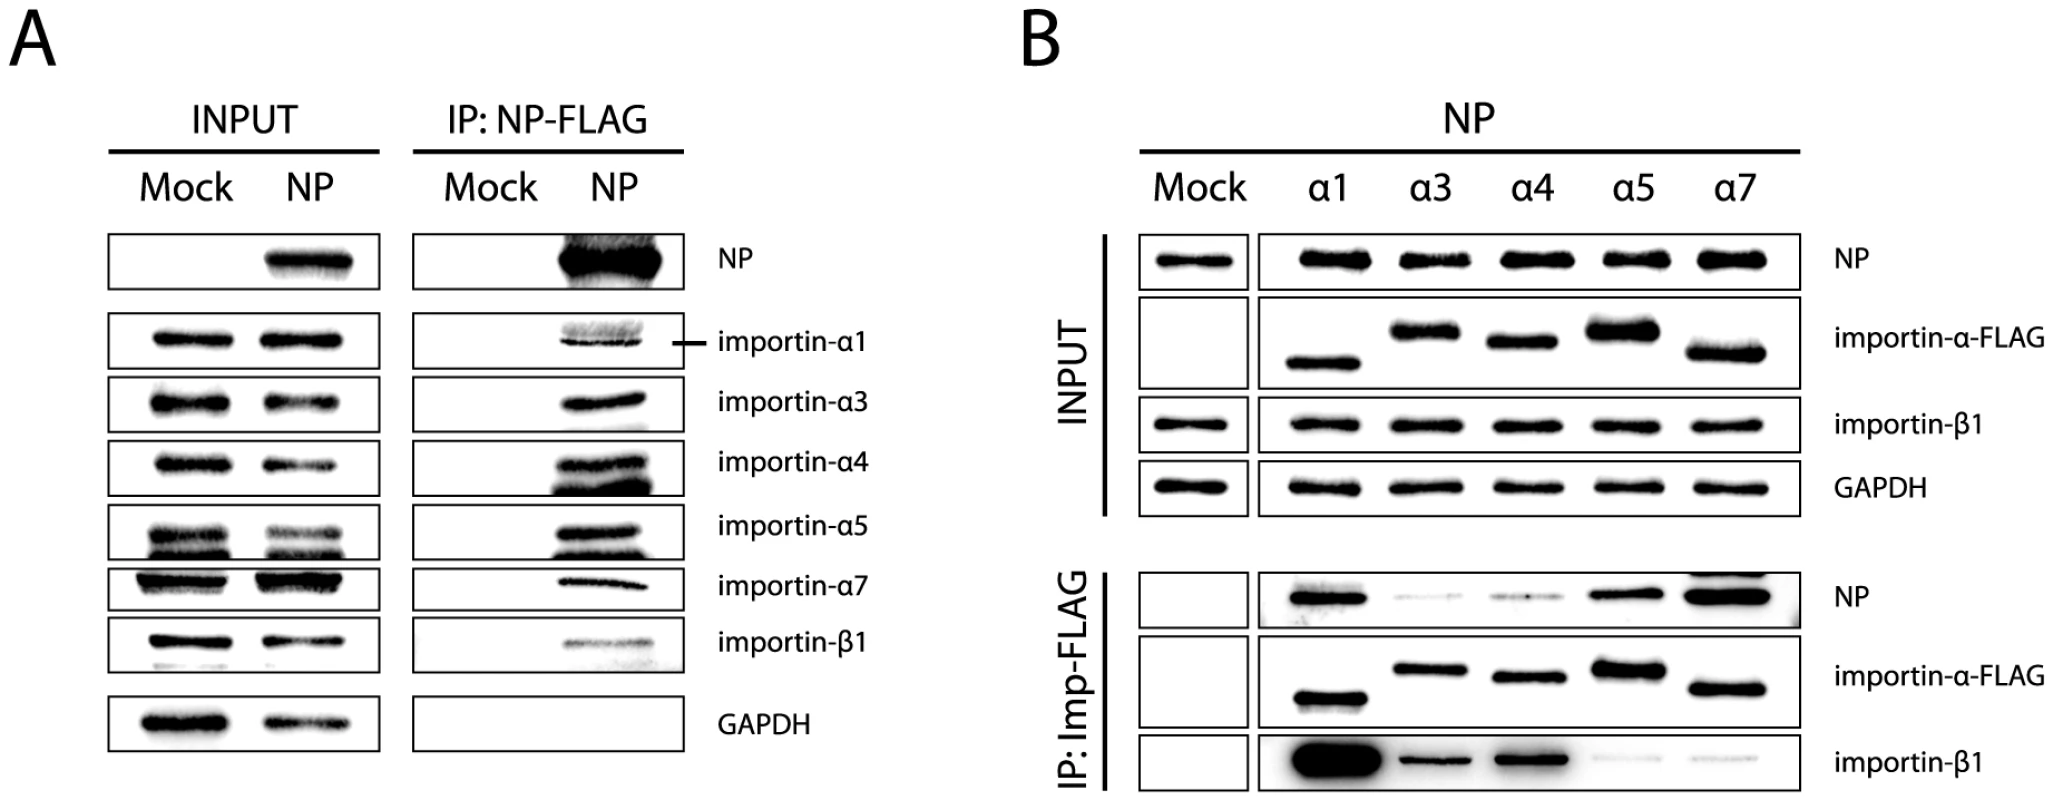 NP binding affinity to individual importin-α isoforms.